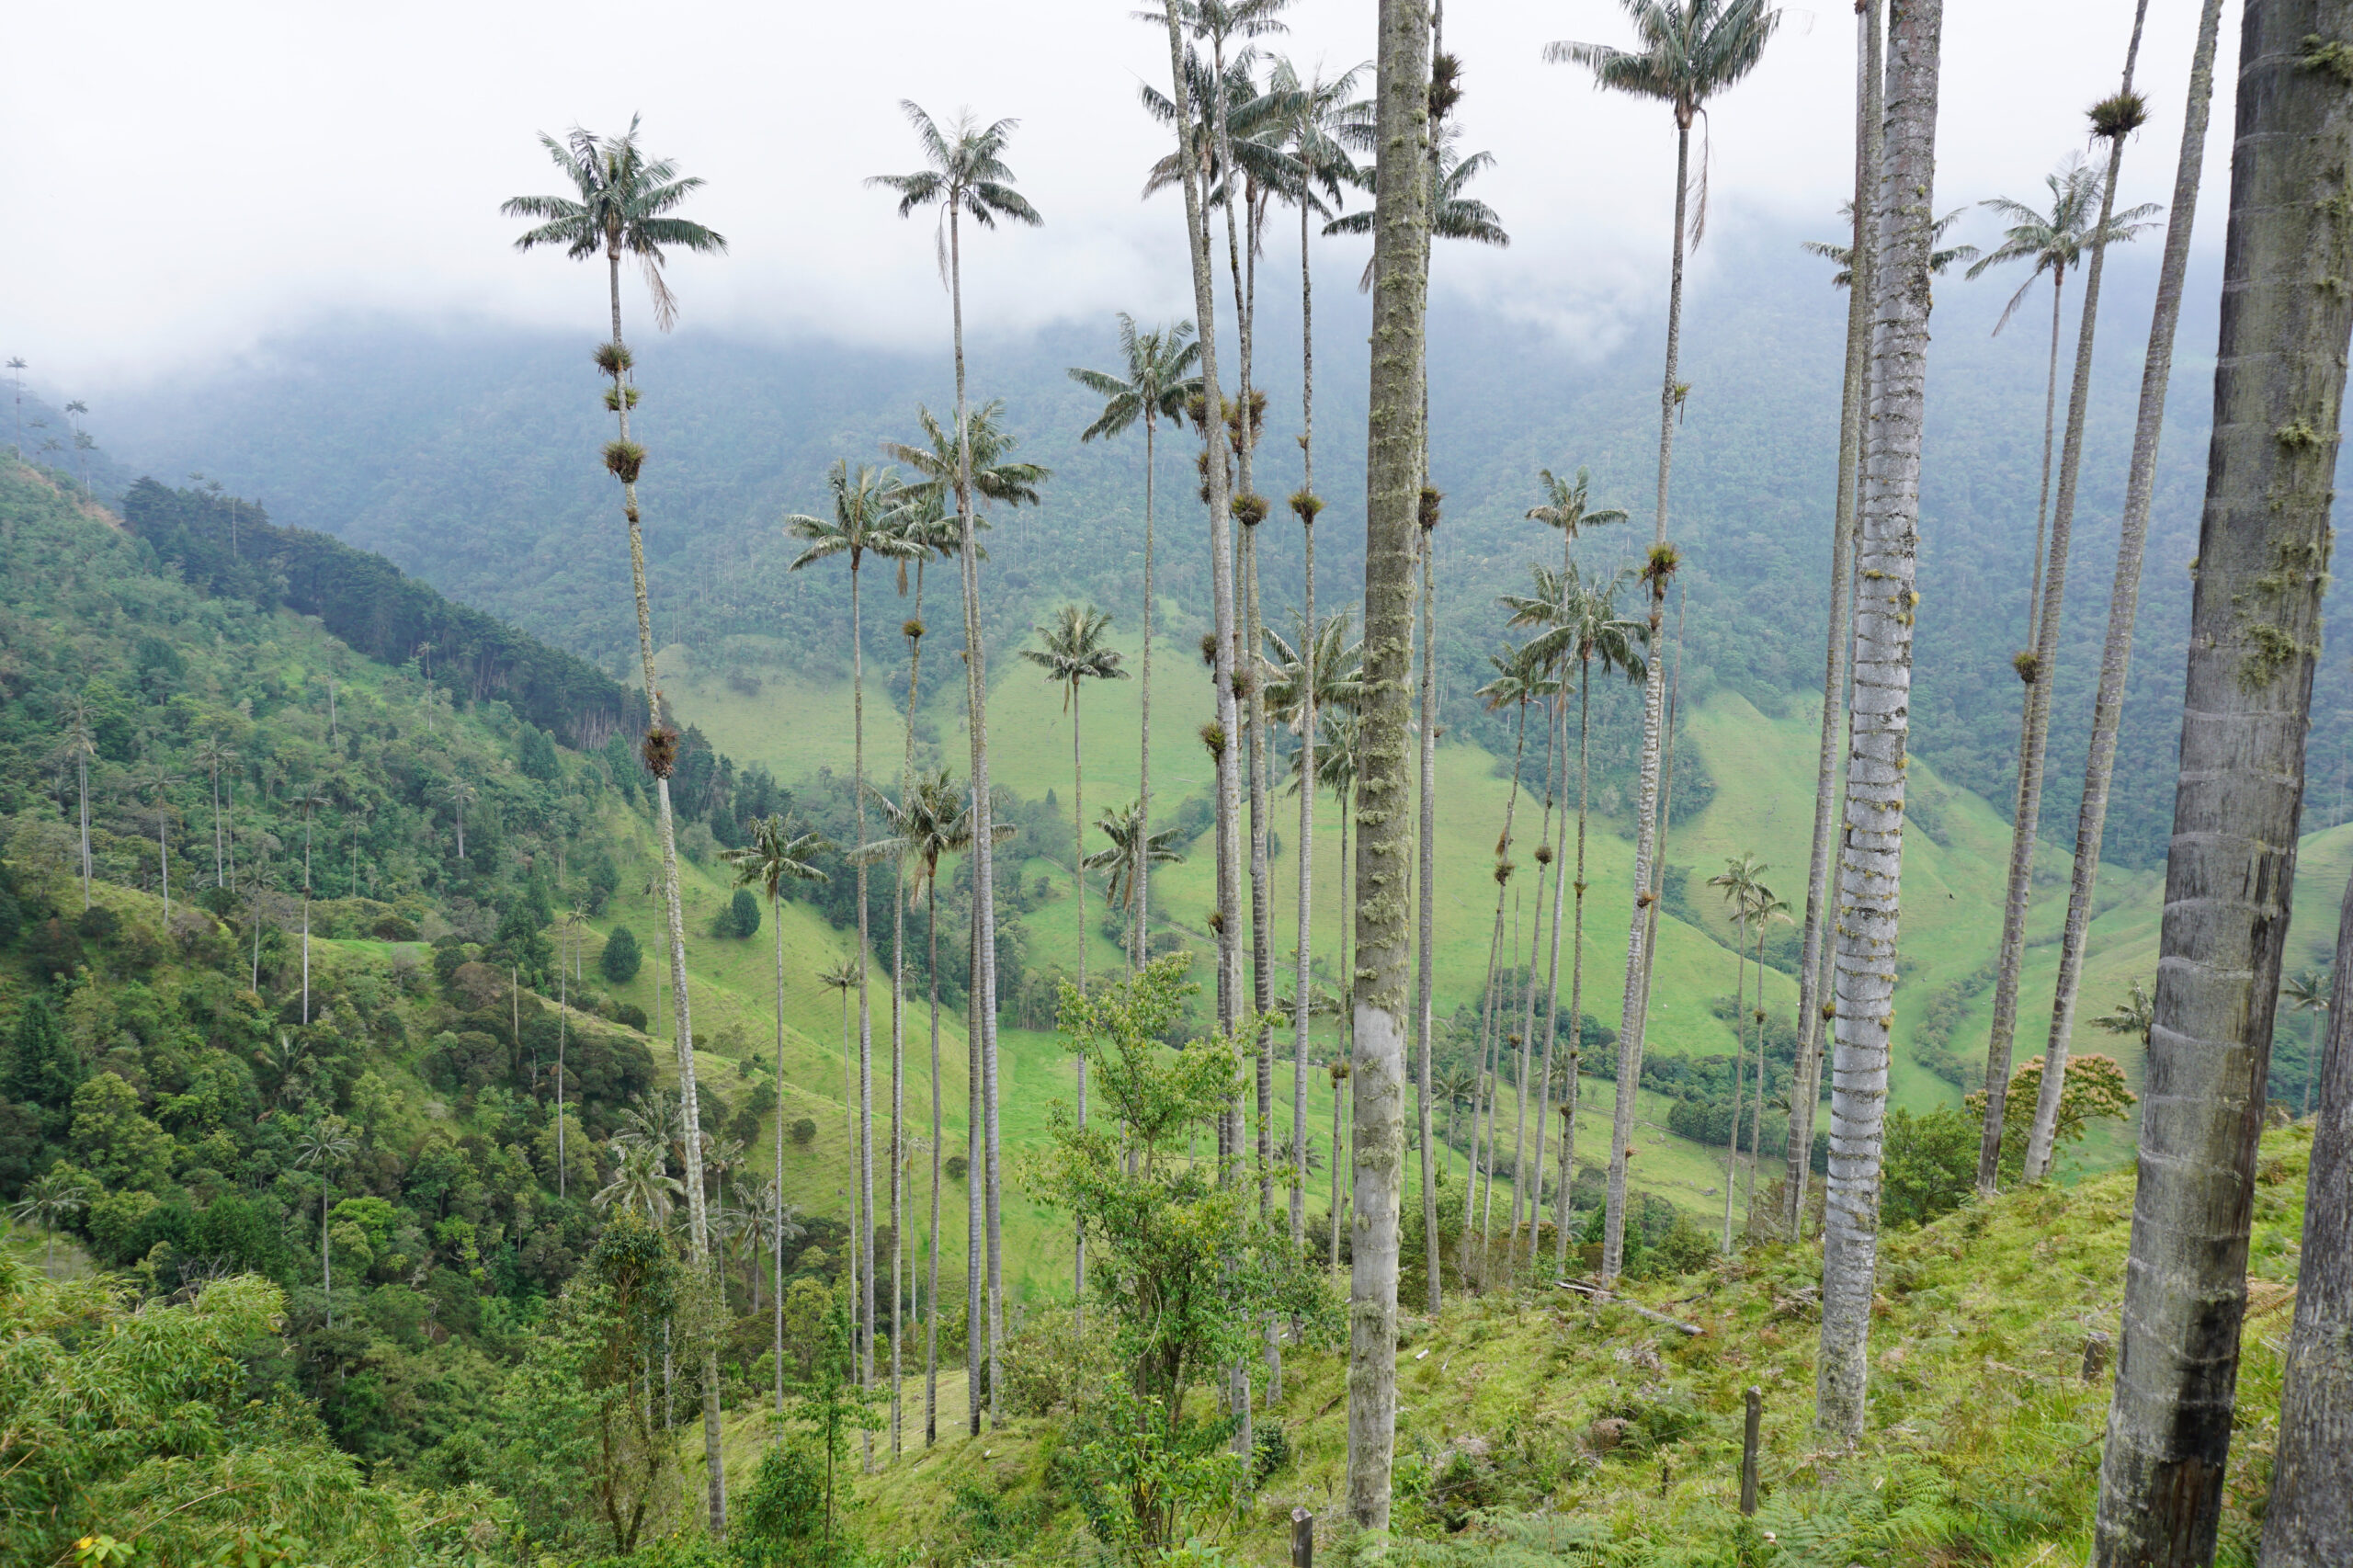 View of the remains palm trees from the top of Valle de Cocora